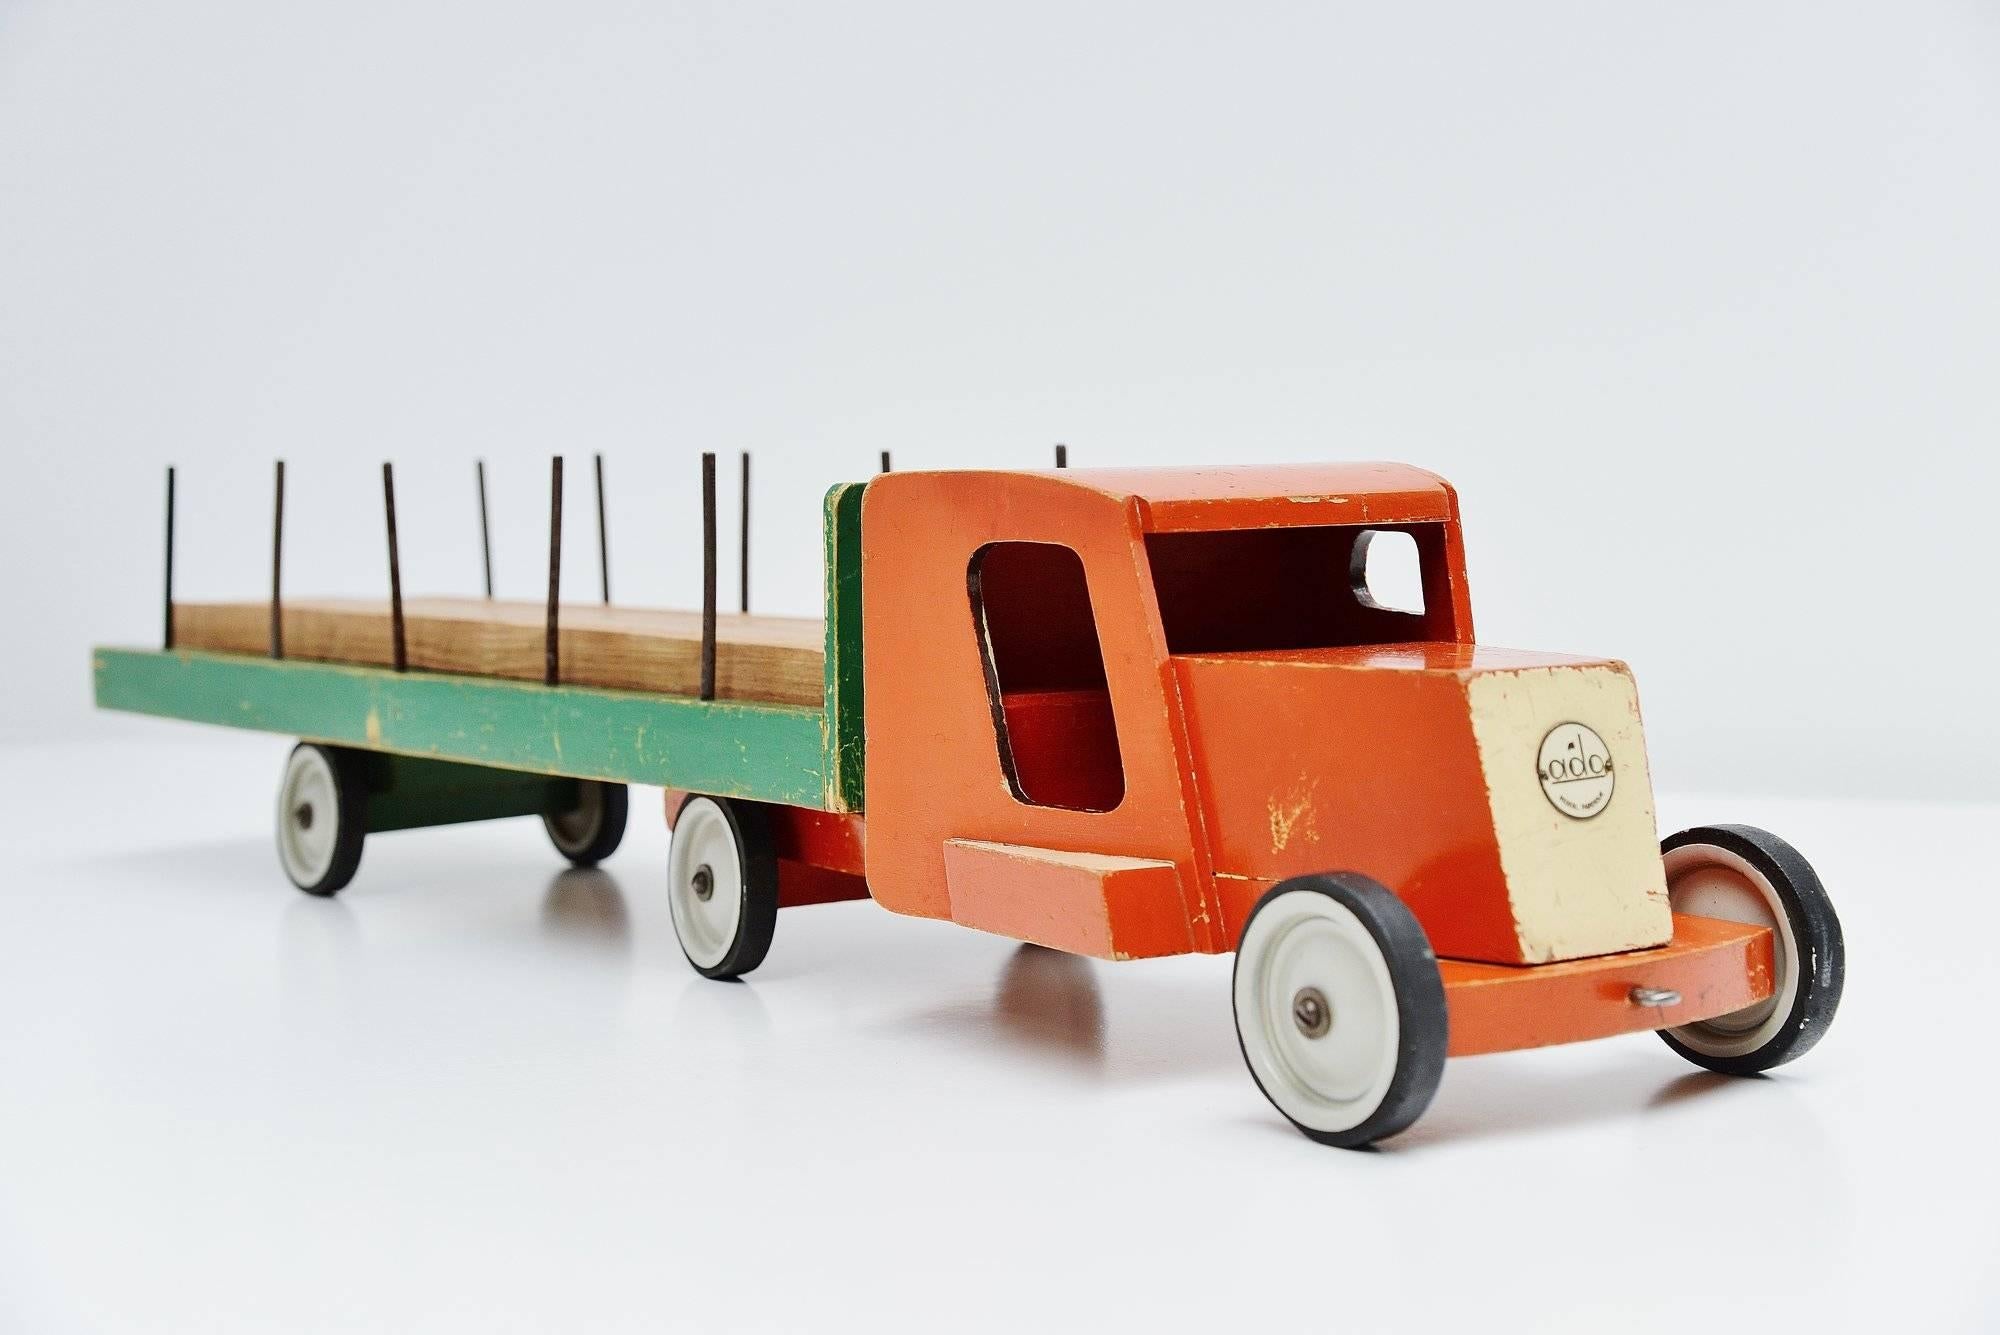 Very rare toy ‘houthandel’ (wood transport) truck designed by Ko Verzuu for Ado Holland in 1948. Ado means Arbeid door onvolwaardigen, translated; labor by incapacitated, which makes this an even more special piece. Toys by Ado are being highly